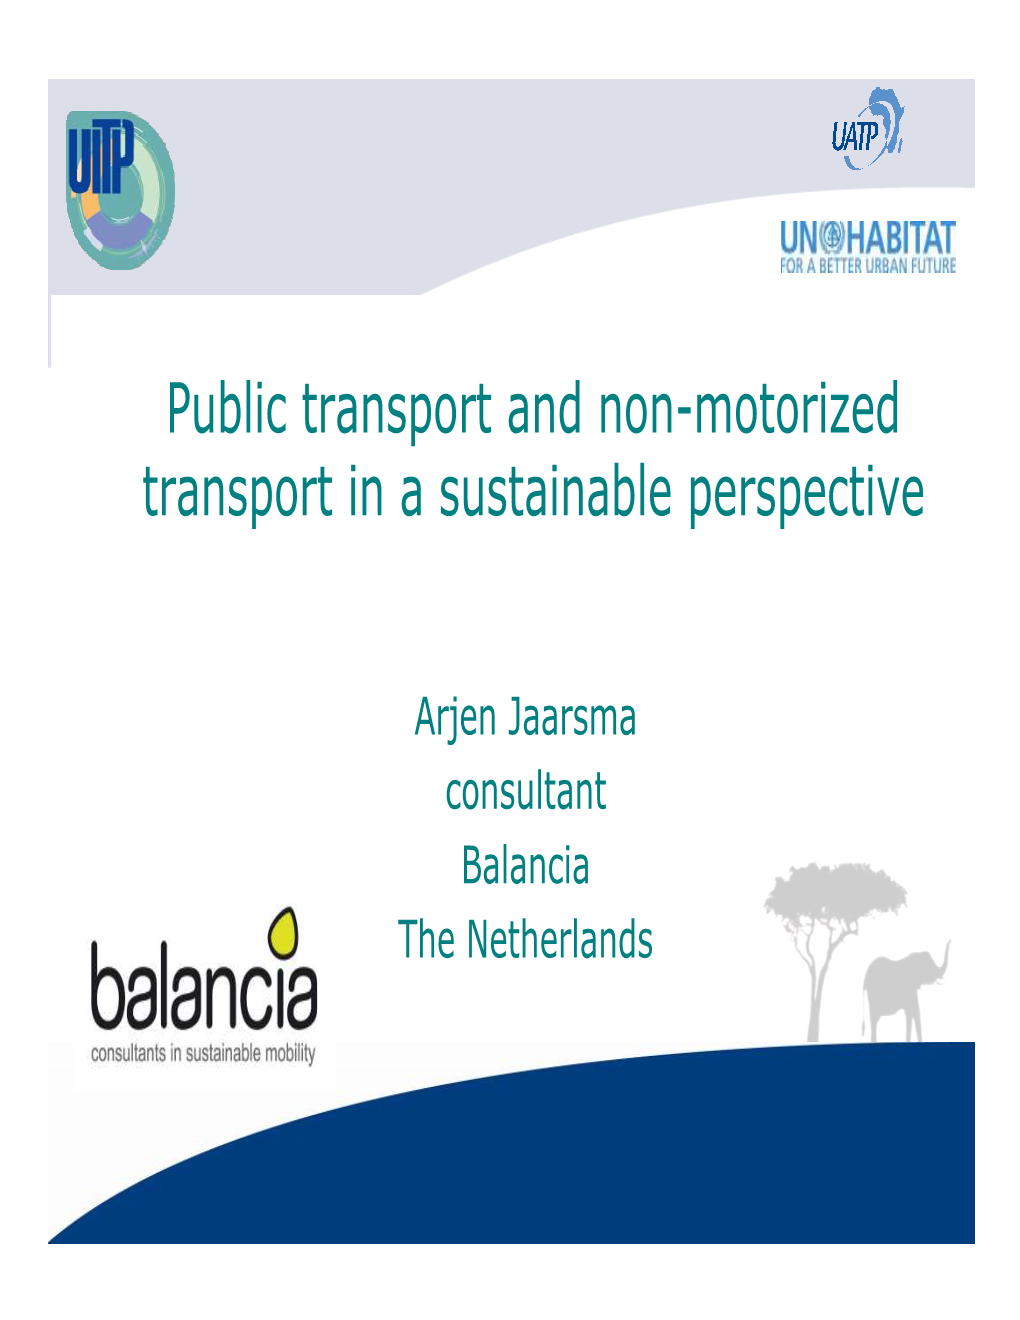 Public Transport and Non-Motorized Transport in a Sustainable Perspective